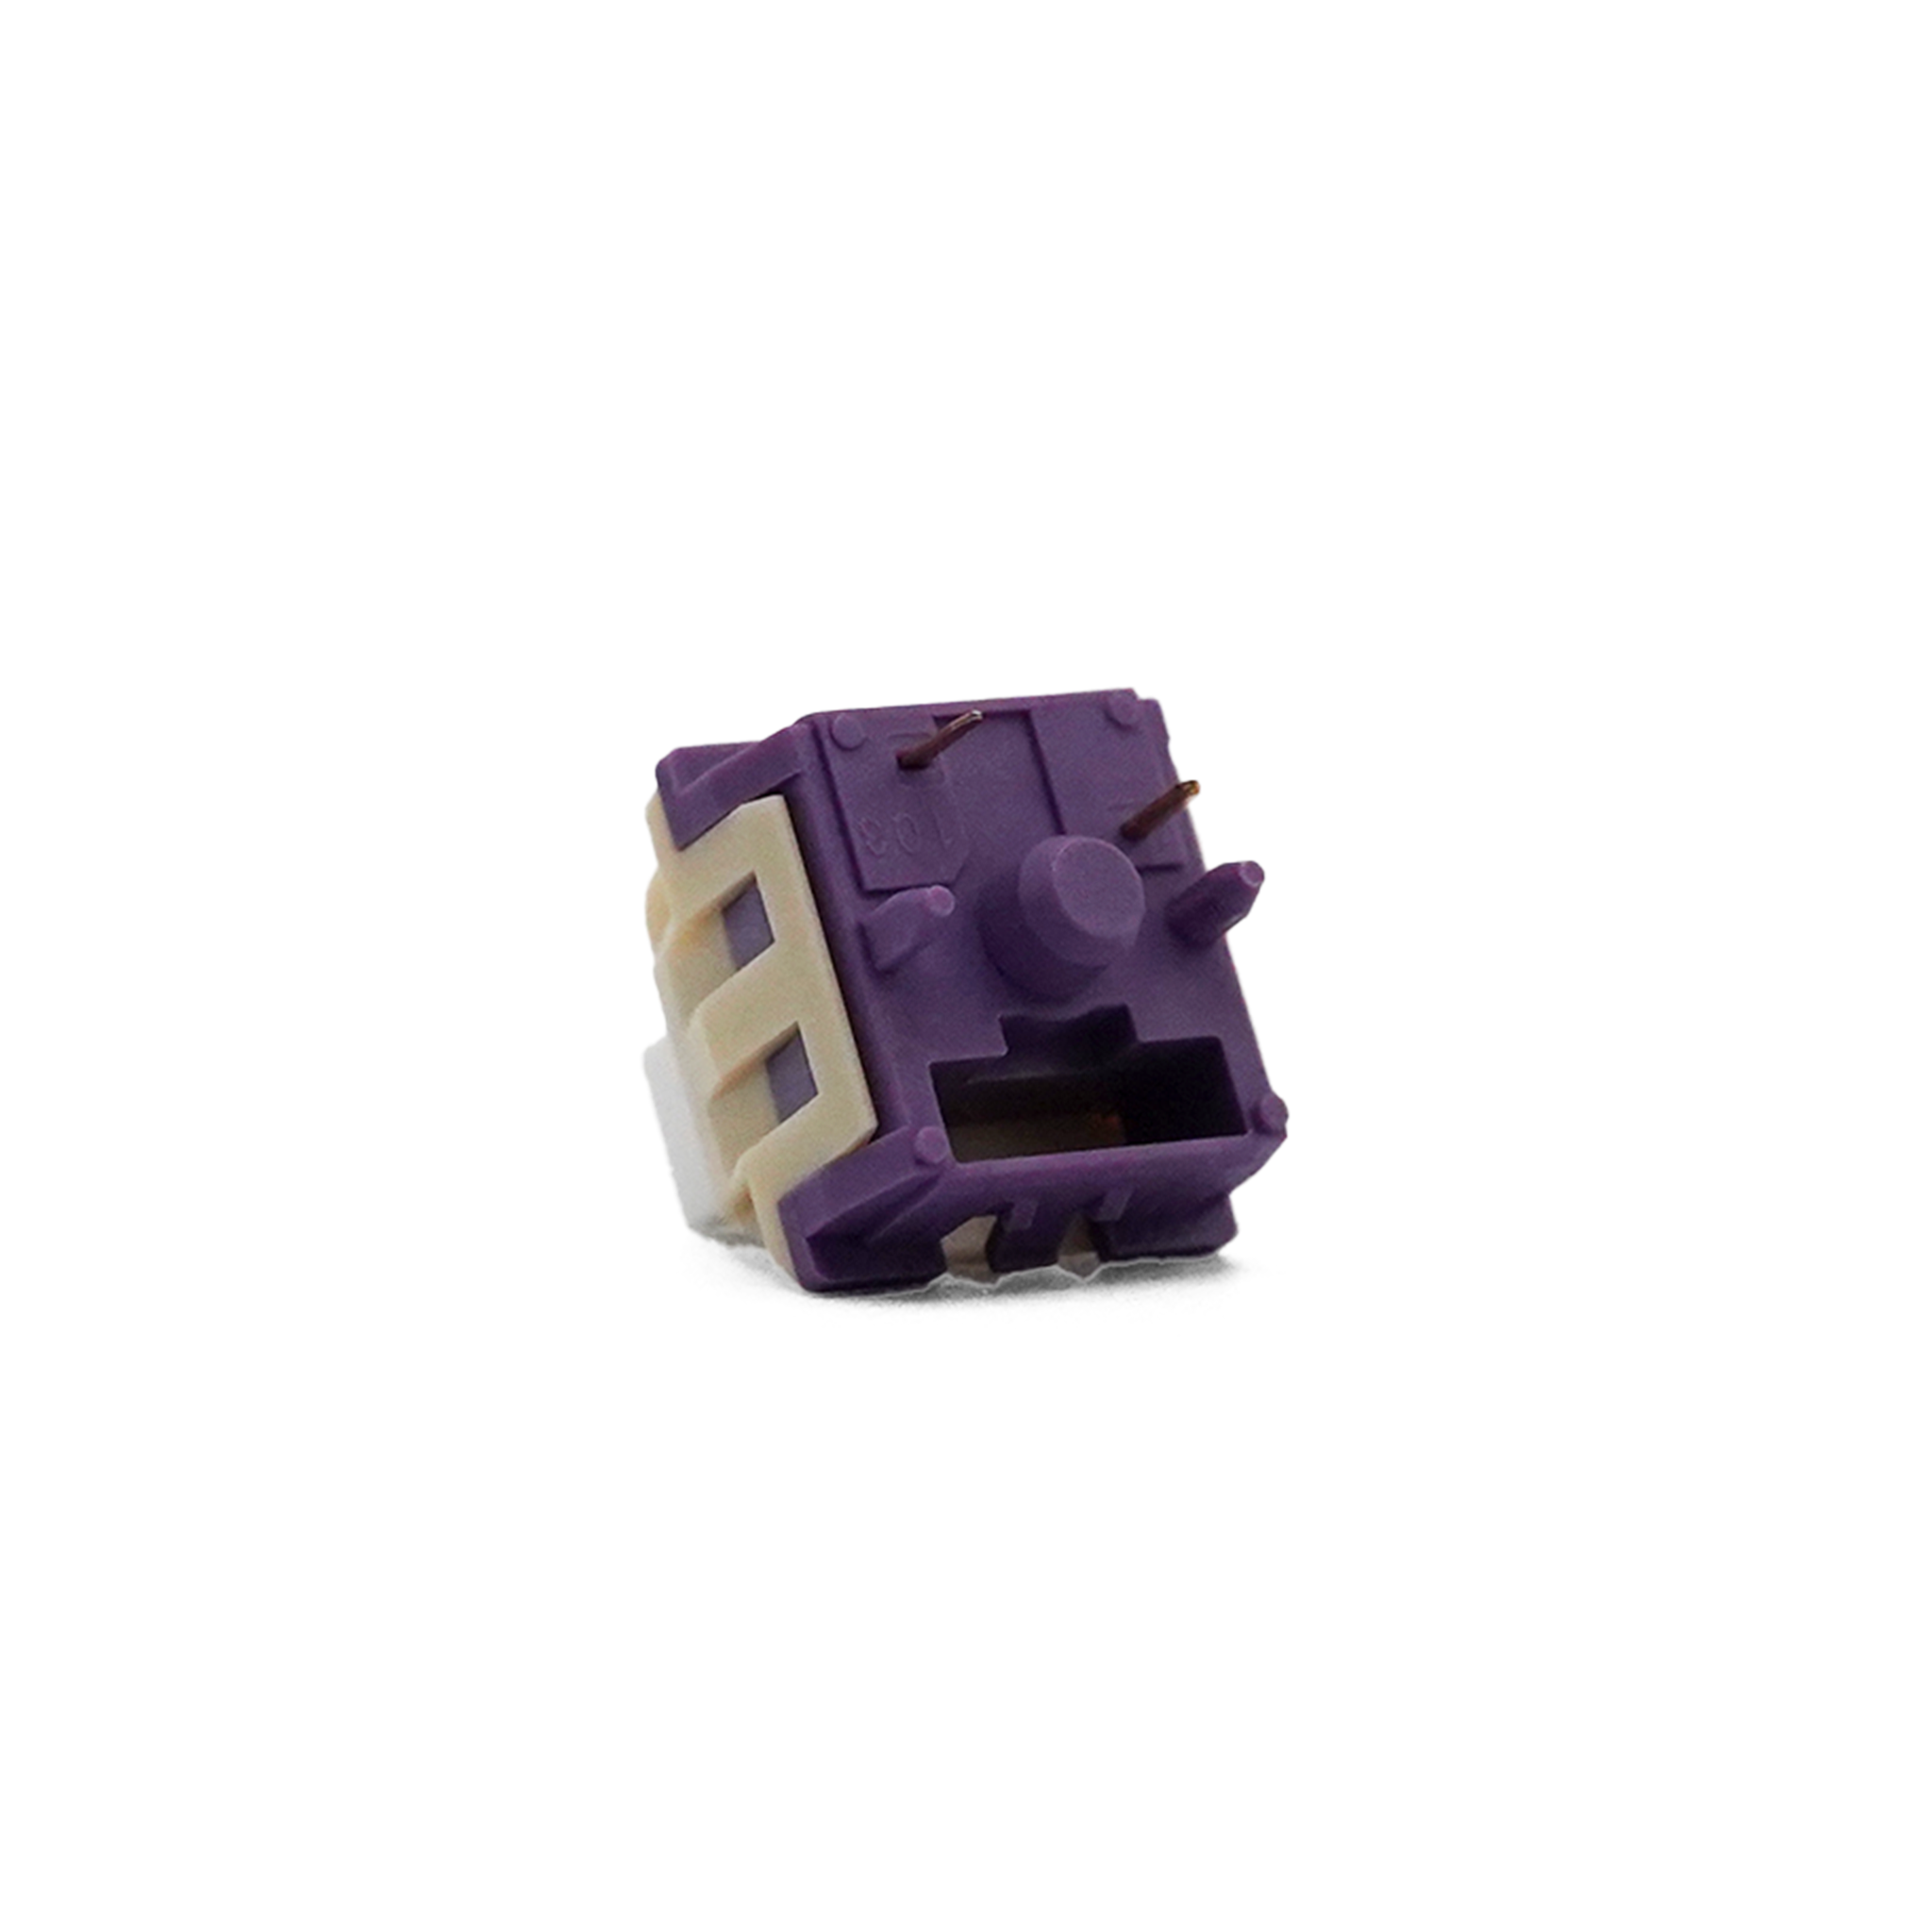 Wuque WS Onion Linear Switches